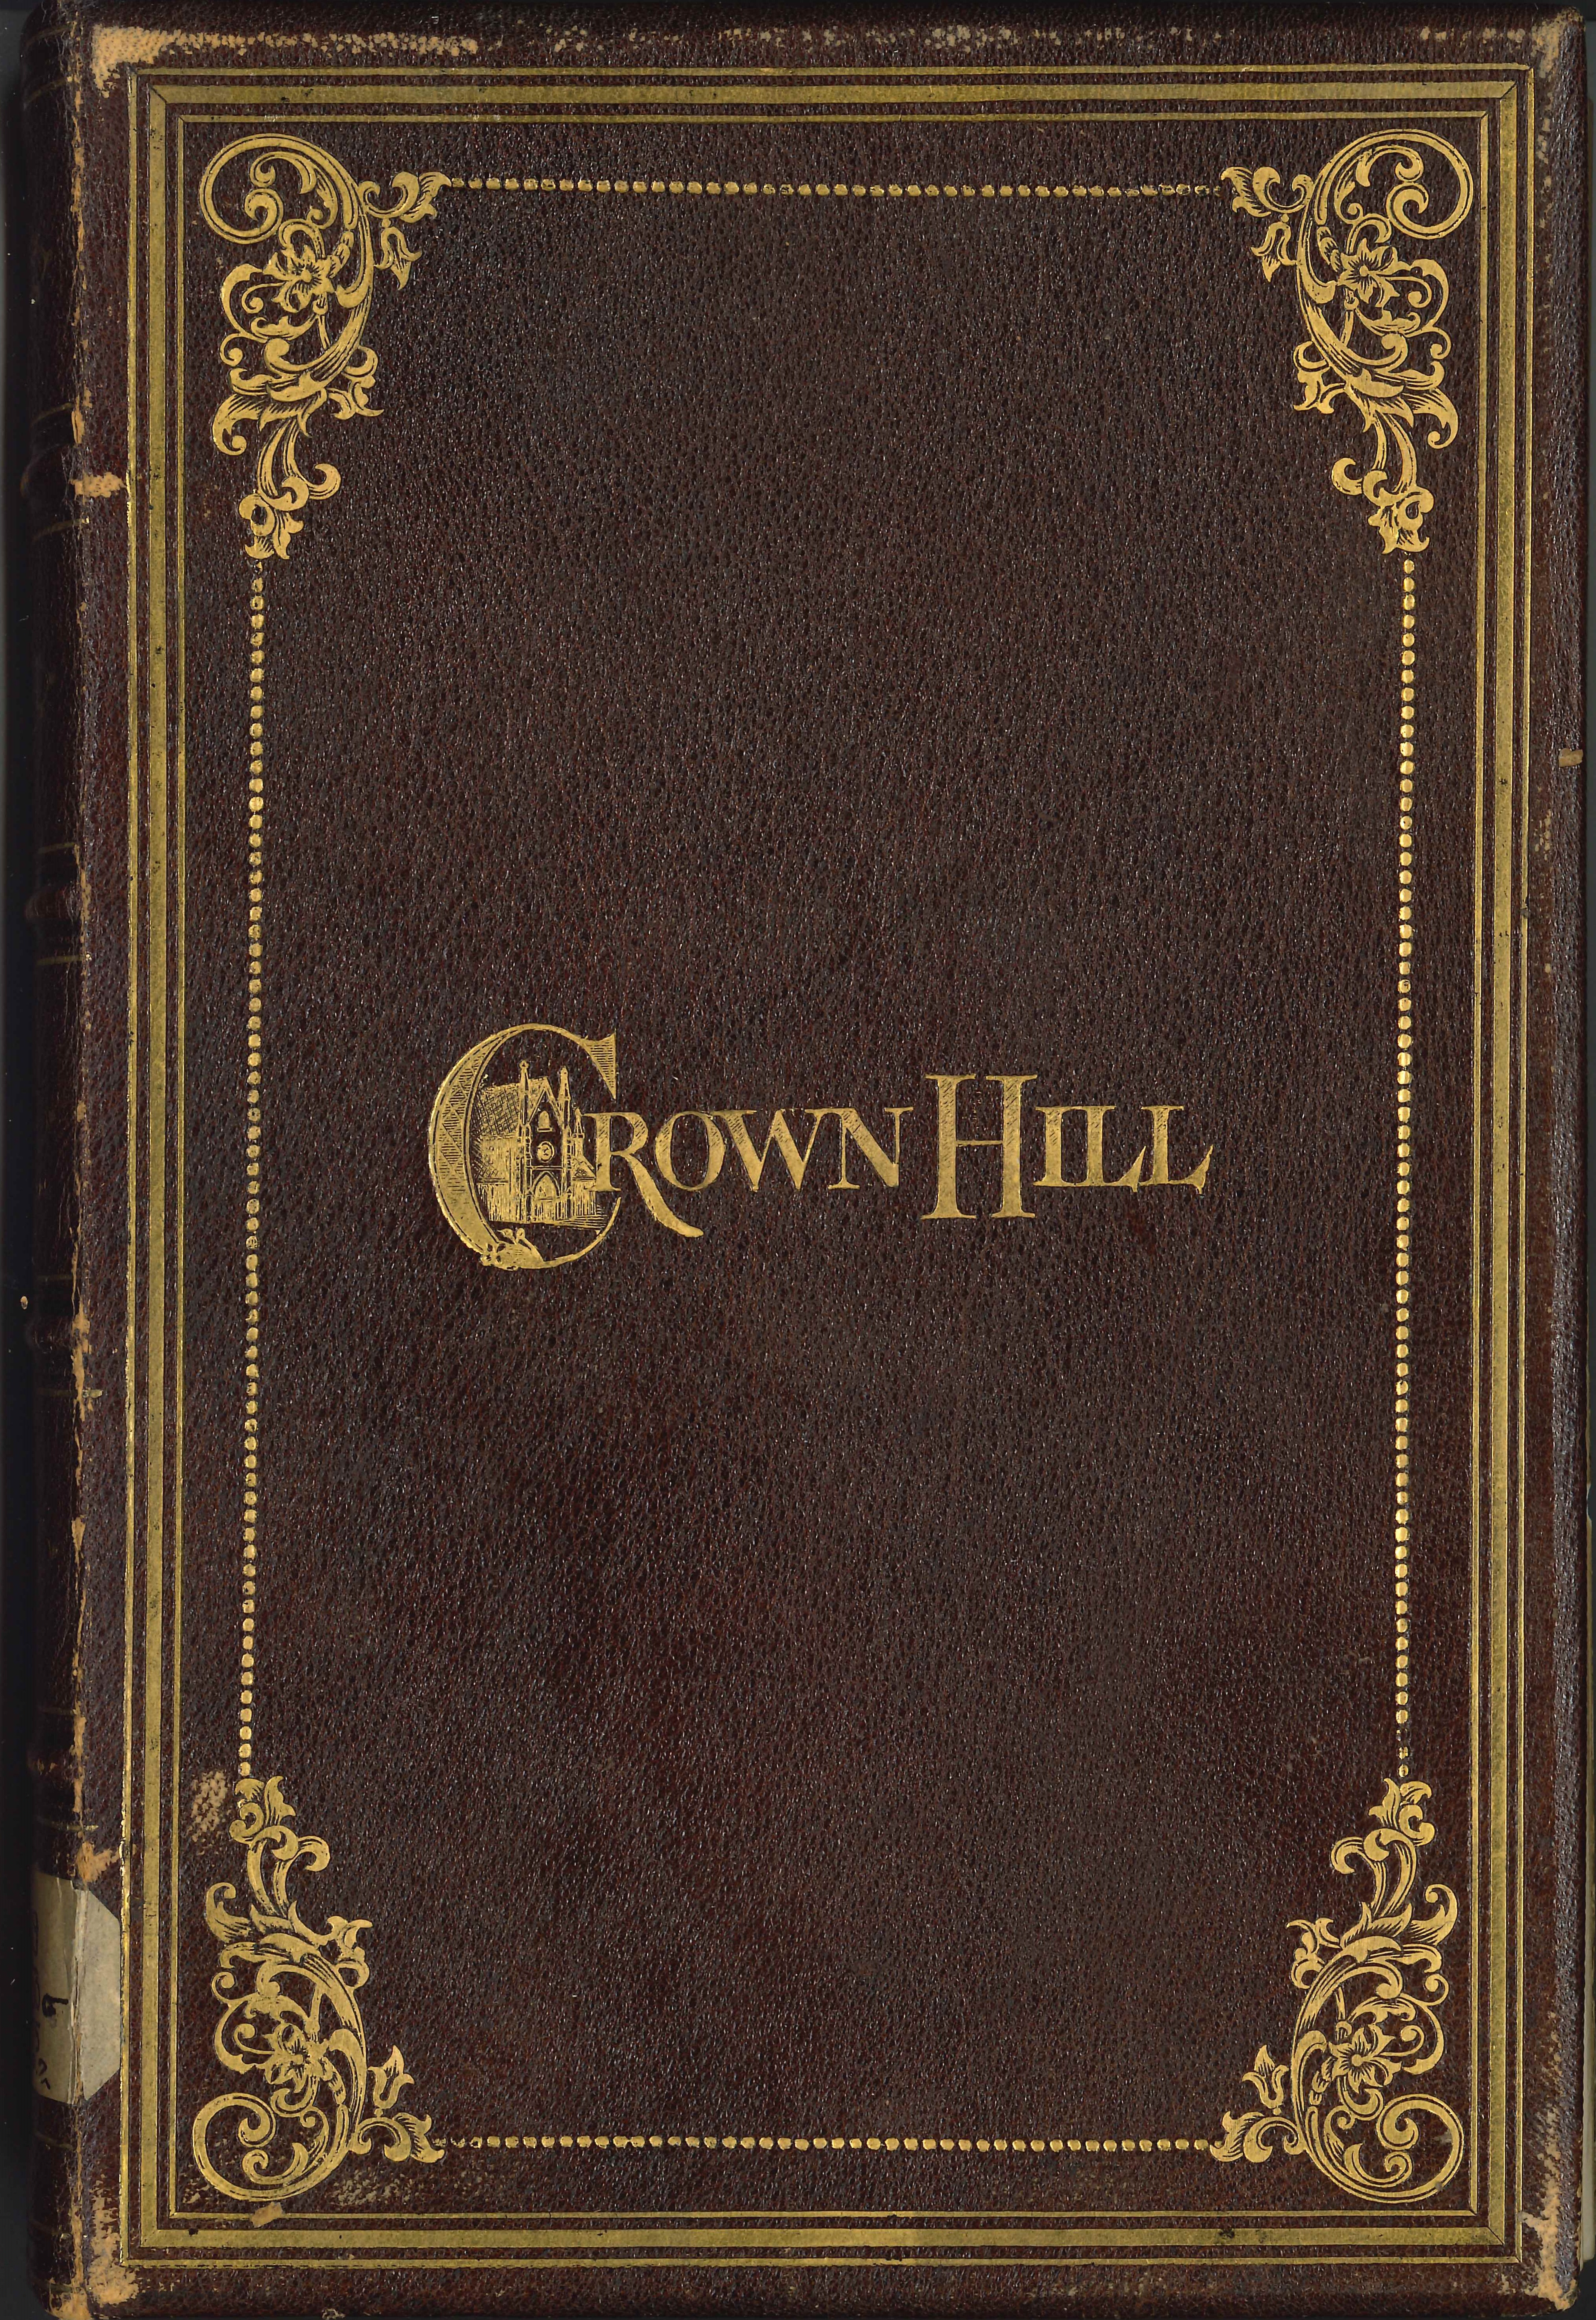 1875 edition cover